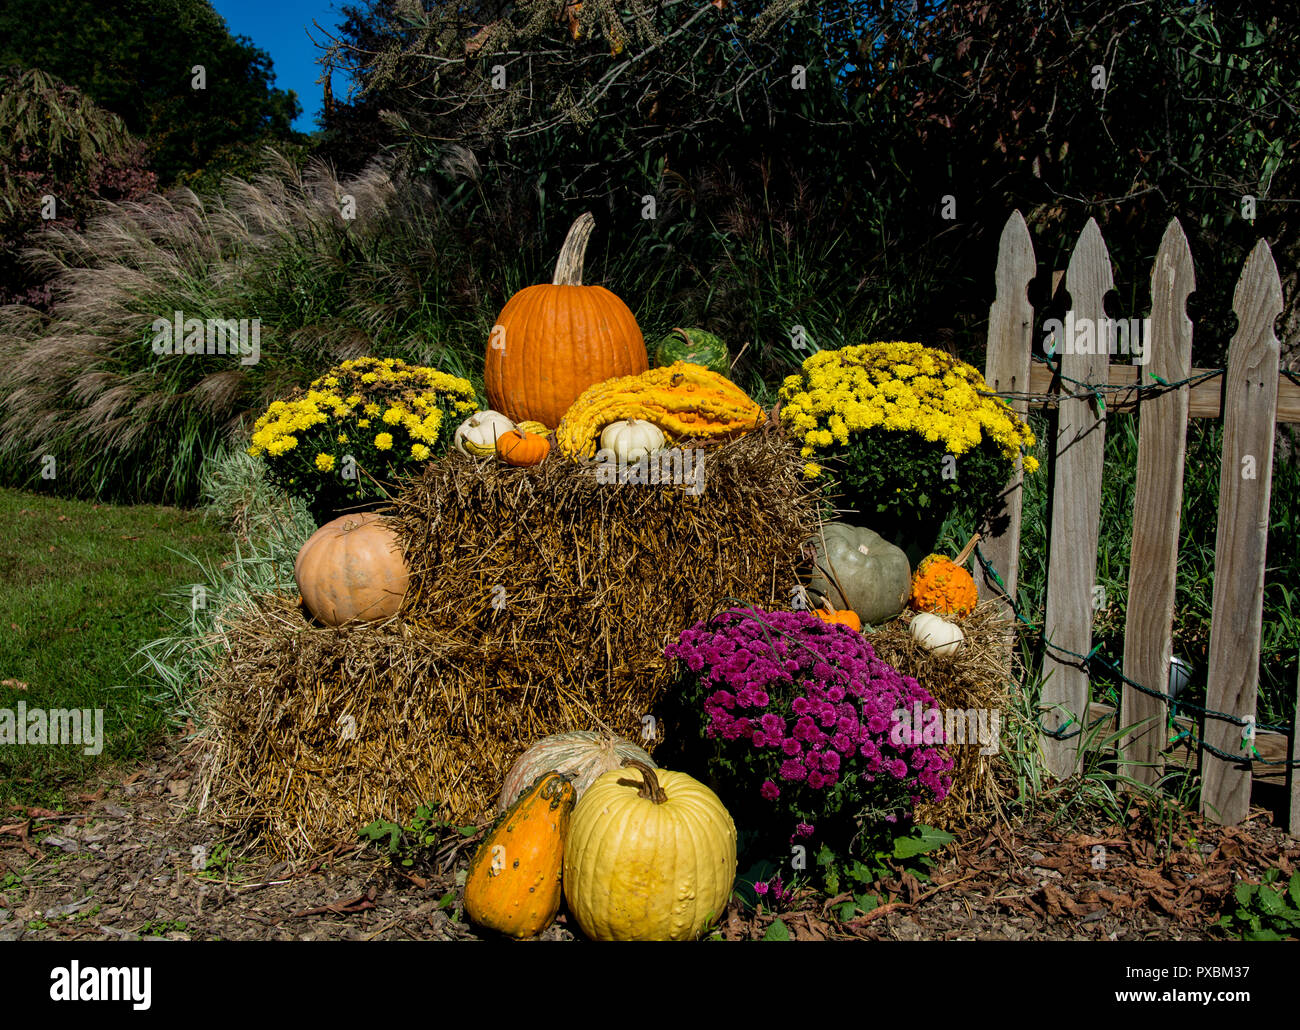 A festive fall display on a crip October morning full of colorful pumpkins, gourds and flowers. Stock Photo